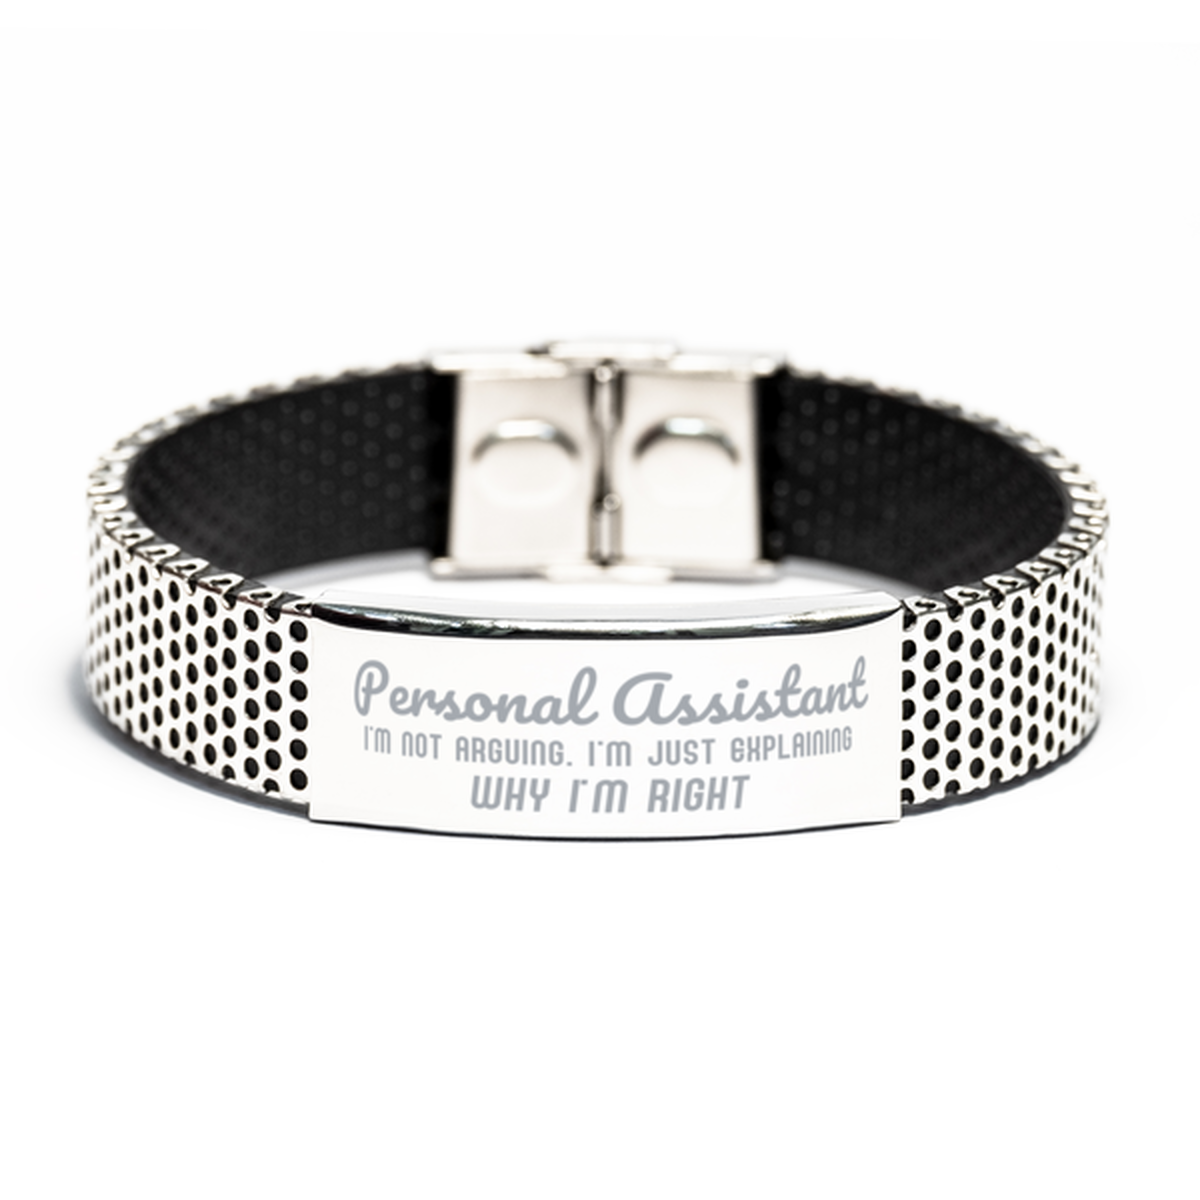 Personal Assistant I'm not Arguing. I'm Just Explaining Why I'm RIGHT Stainless Steel Bracelet, Funny Saying Quote Personal Assistant Gifts For Personal Assistant Graduation Birthday Christmas Gifts for Men Women Coworker